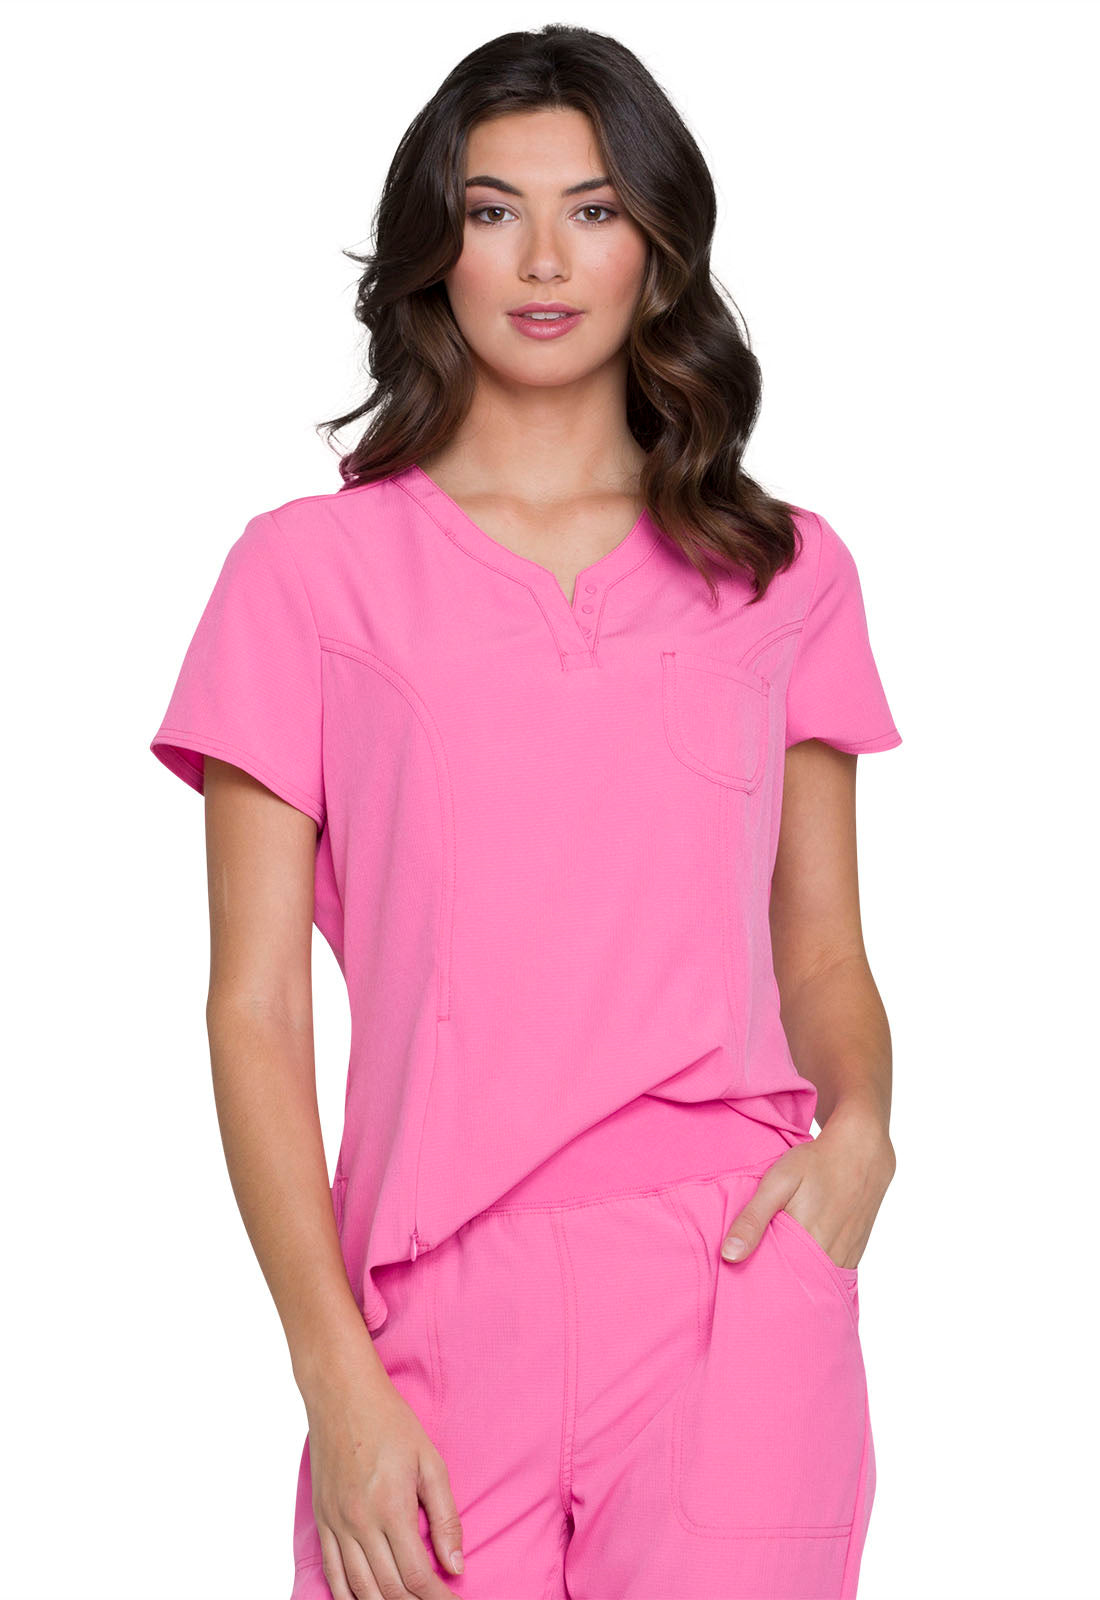 Nurseonality Clearance Women's Soft Muscle Tee with Rolled Cuff in